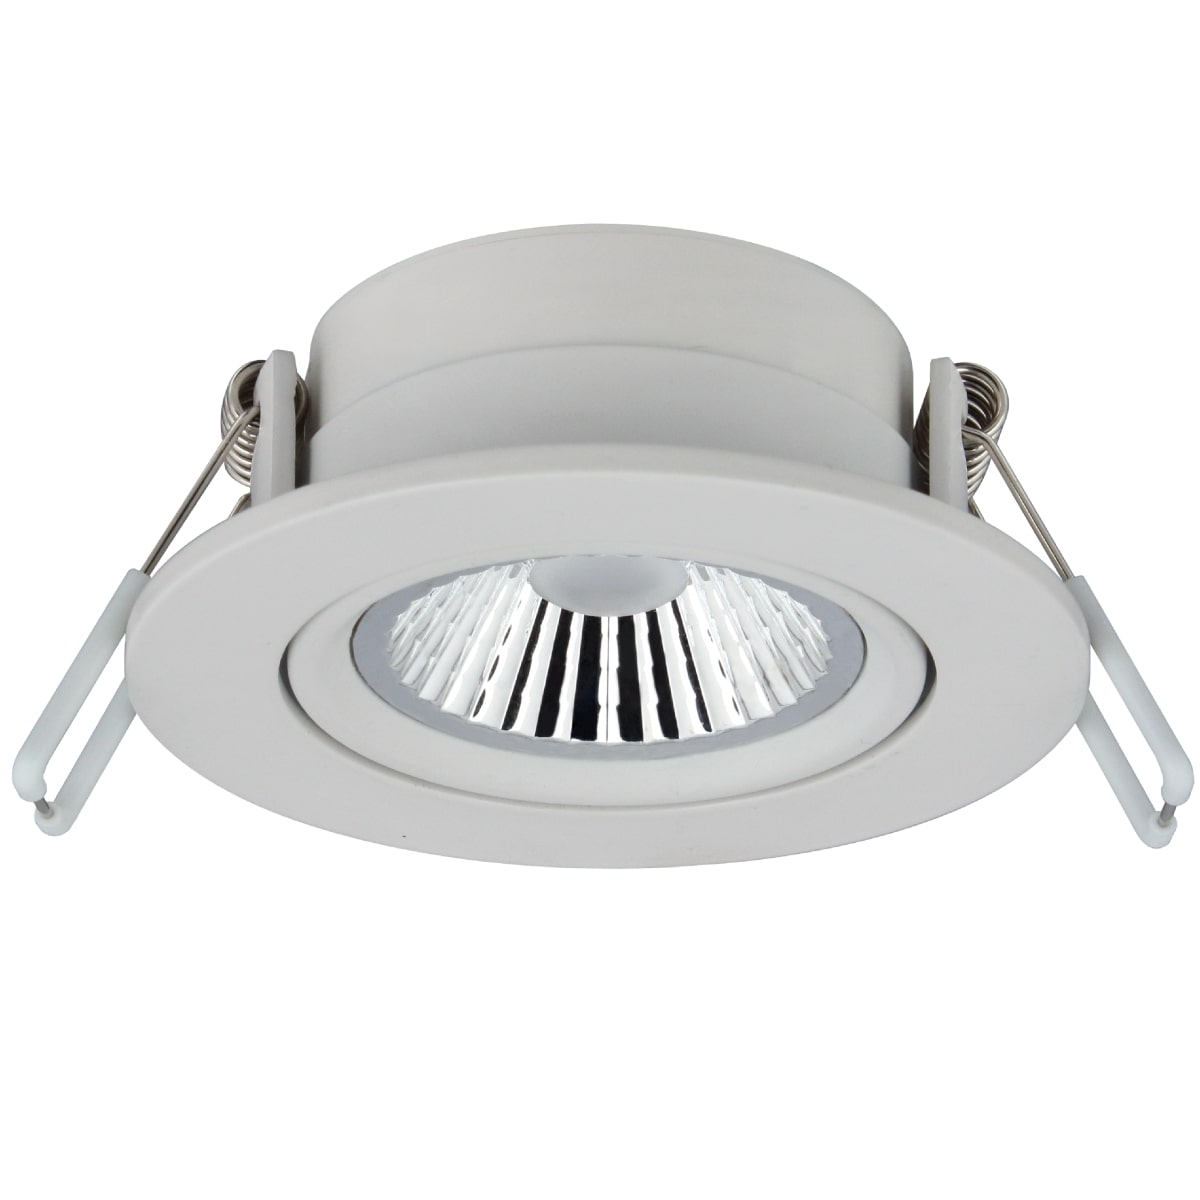 LED-Downlight, weiß 6,0 W, 36°, 400 lm, dimmable, 2700K